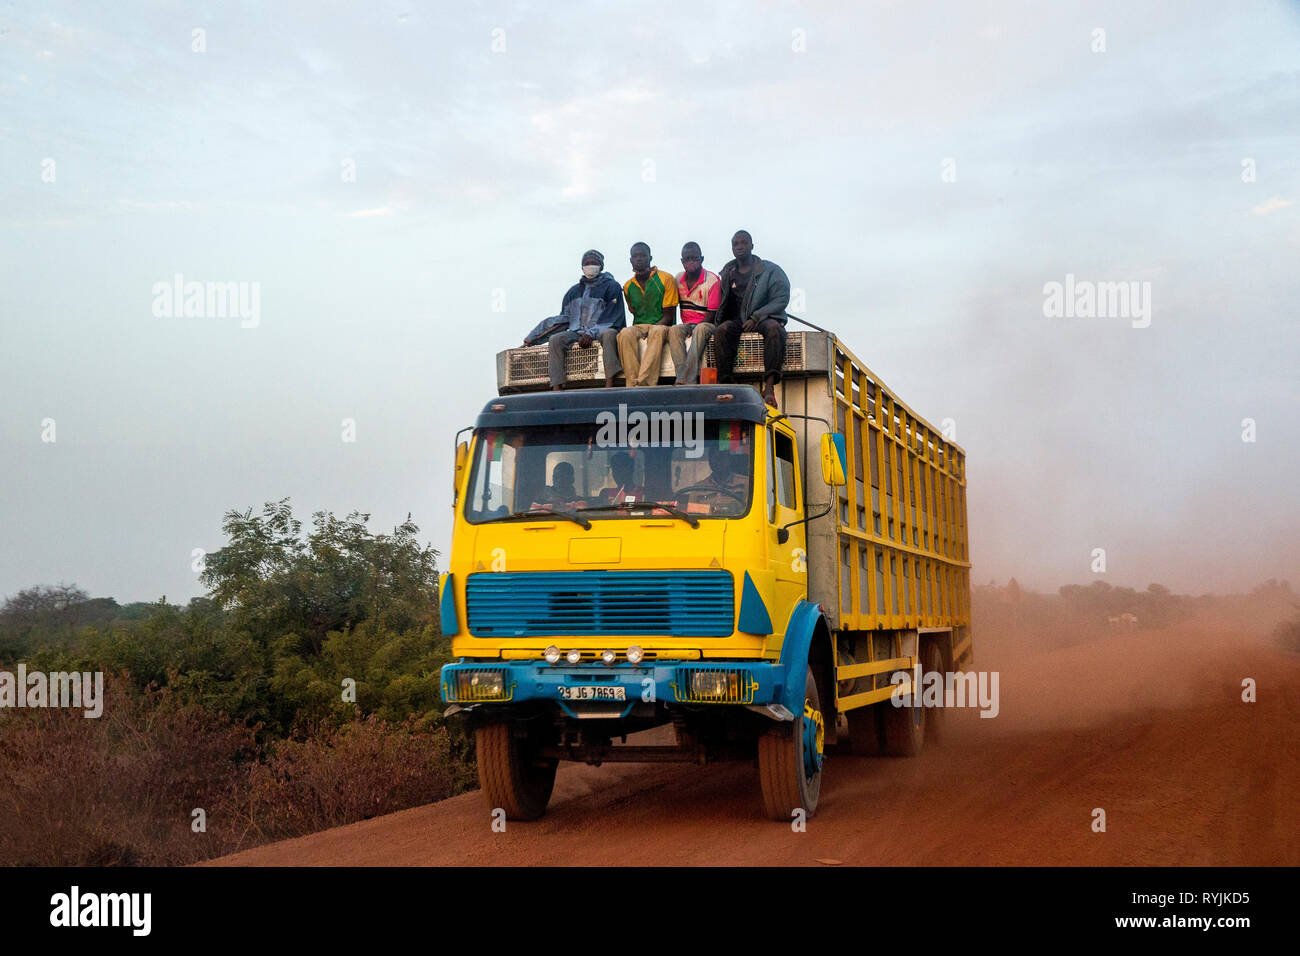 Truck traveling on a dusty road in Burkina Faso. Stock Photo